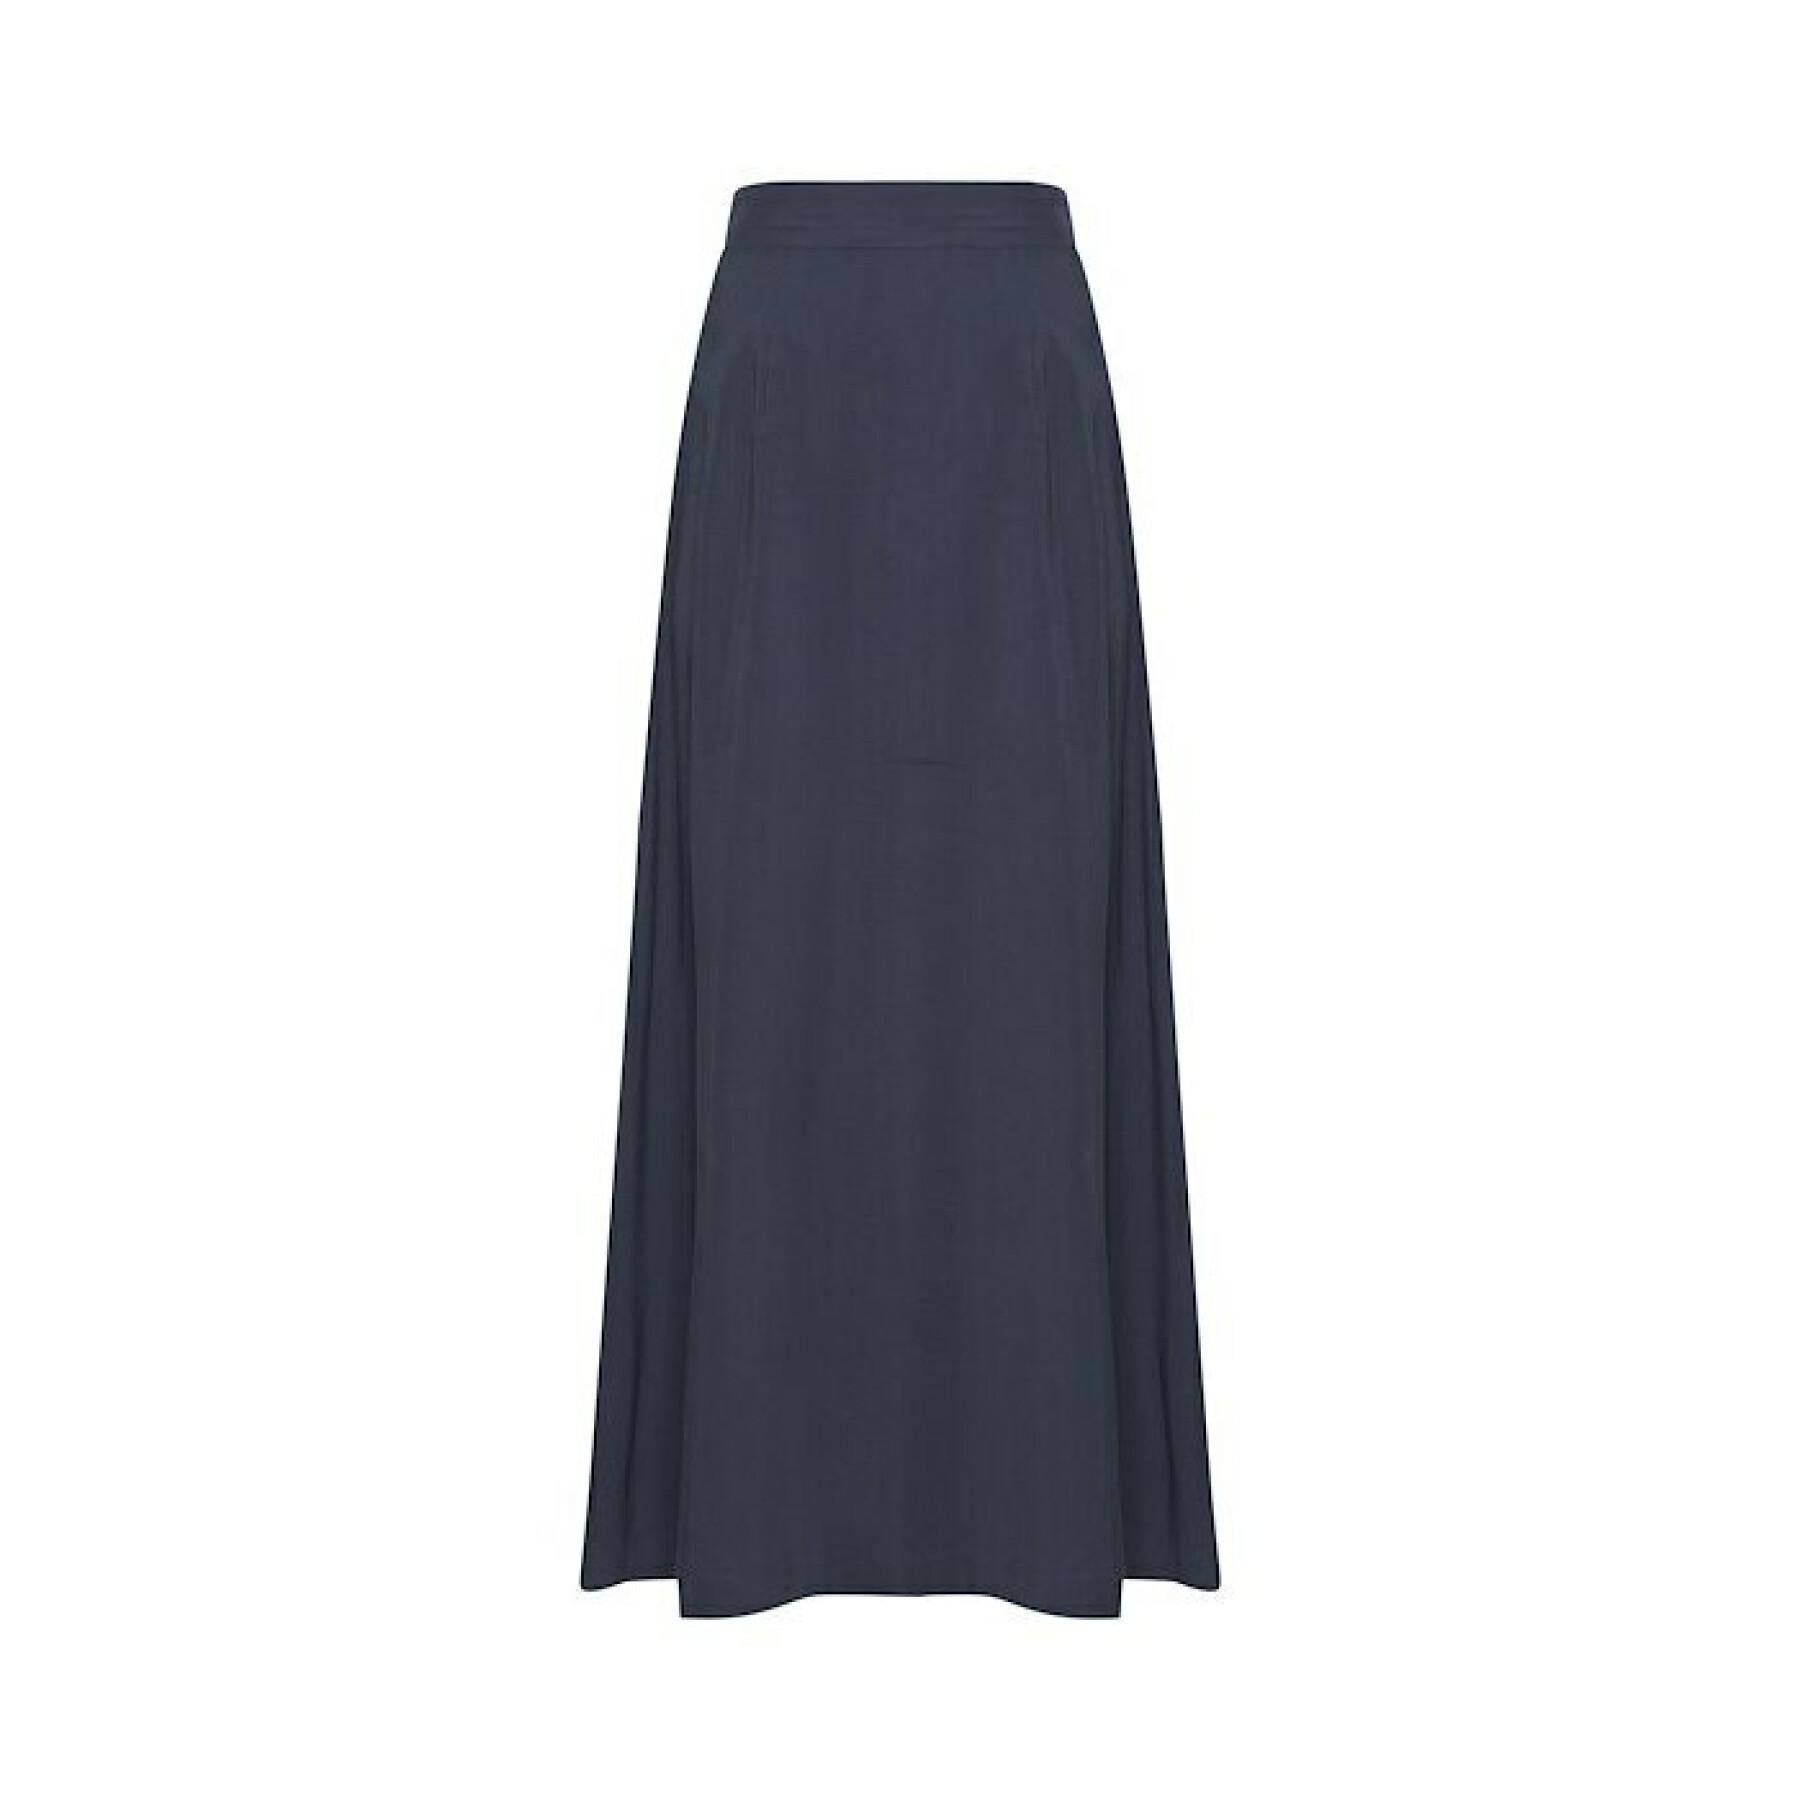 Long skirt buttoned in front of woman Atelier Rêve Irleono